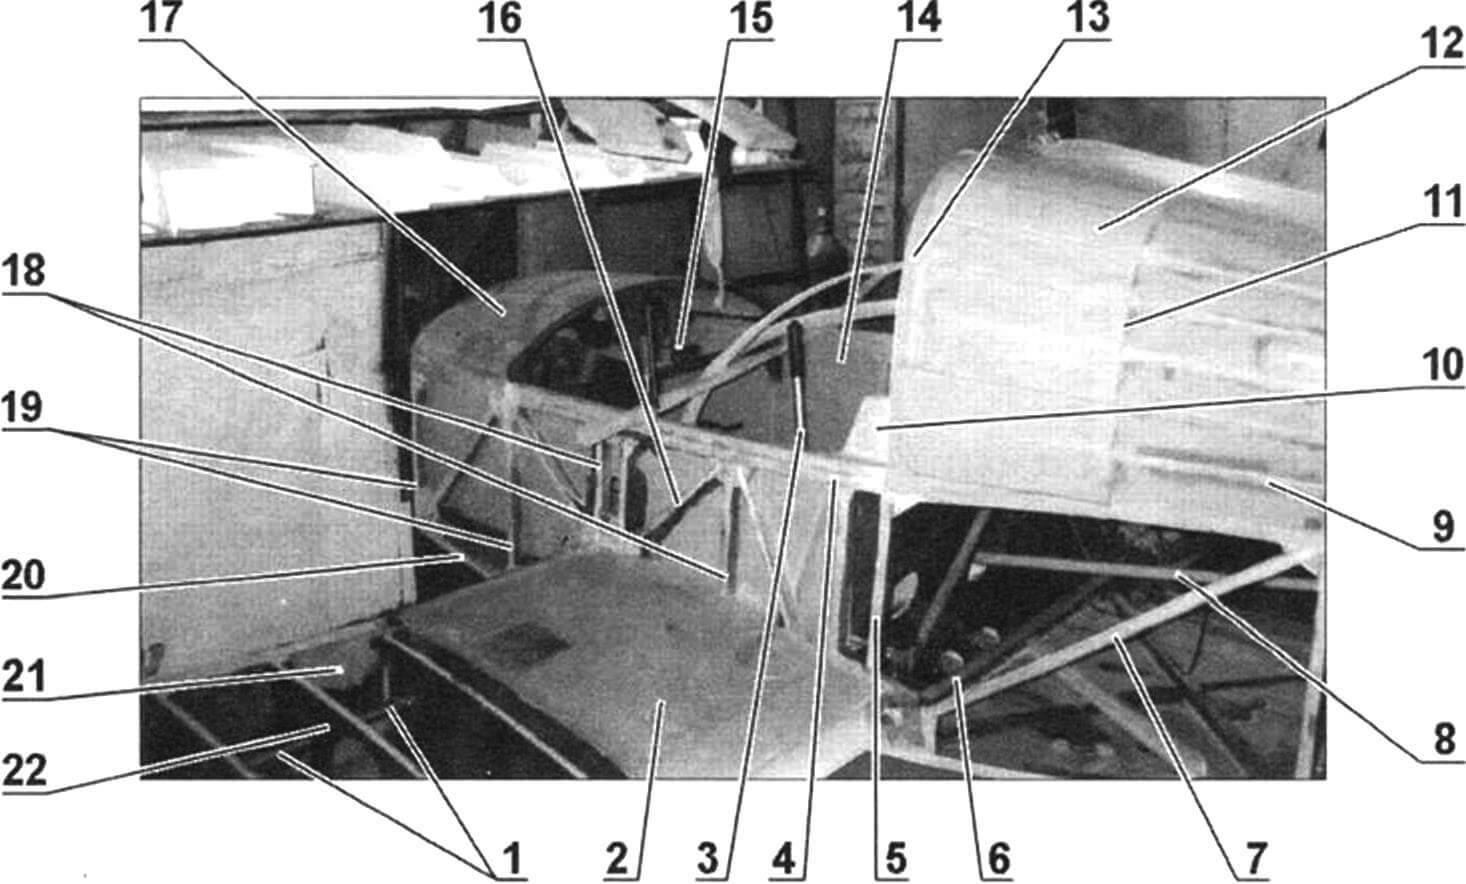 Fragment of the central part of the glider